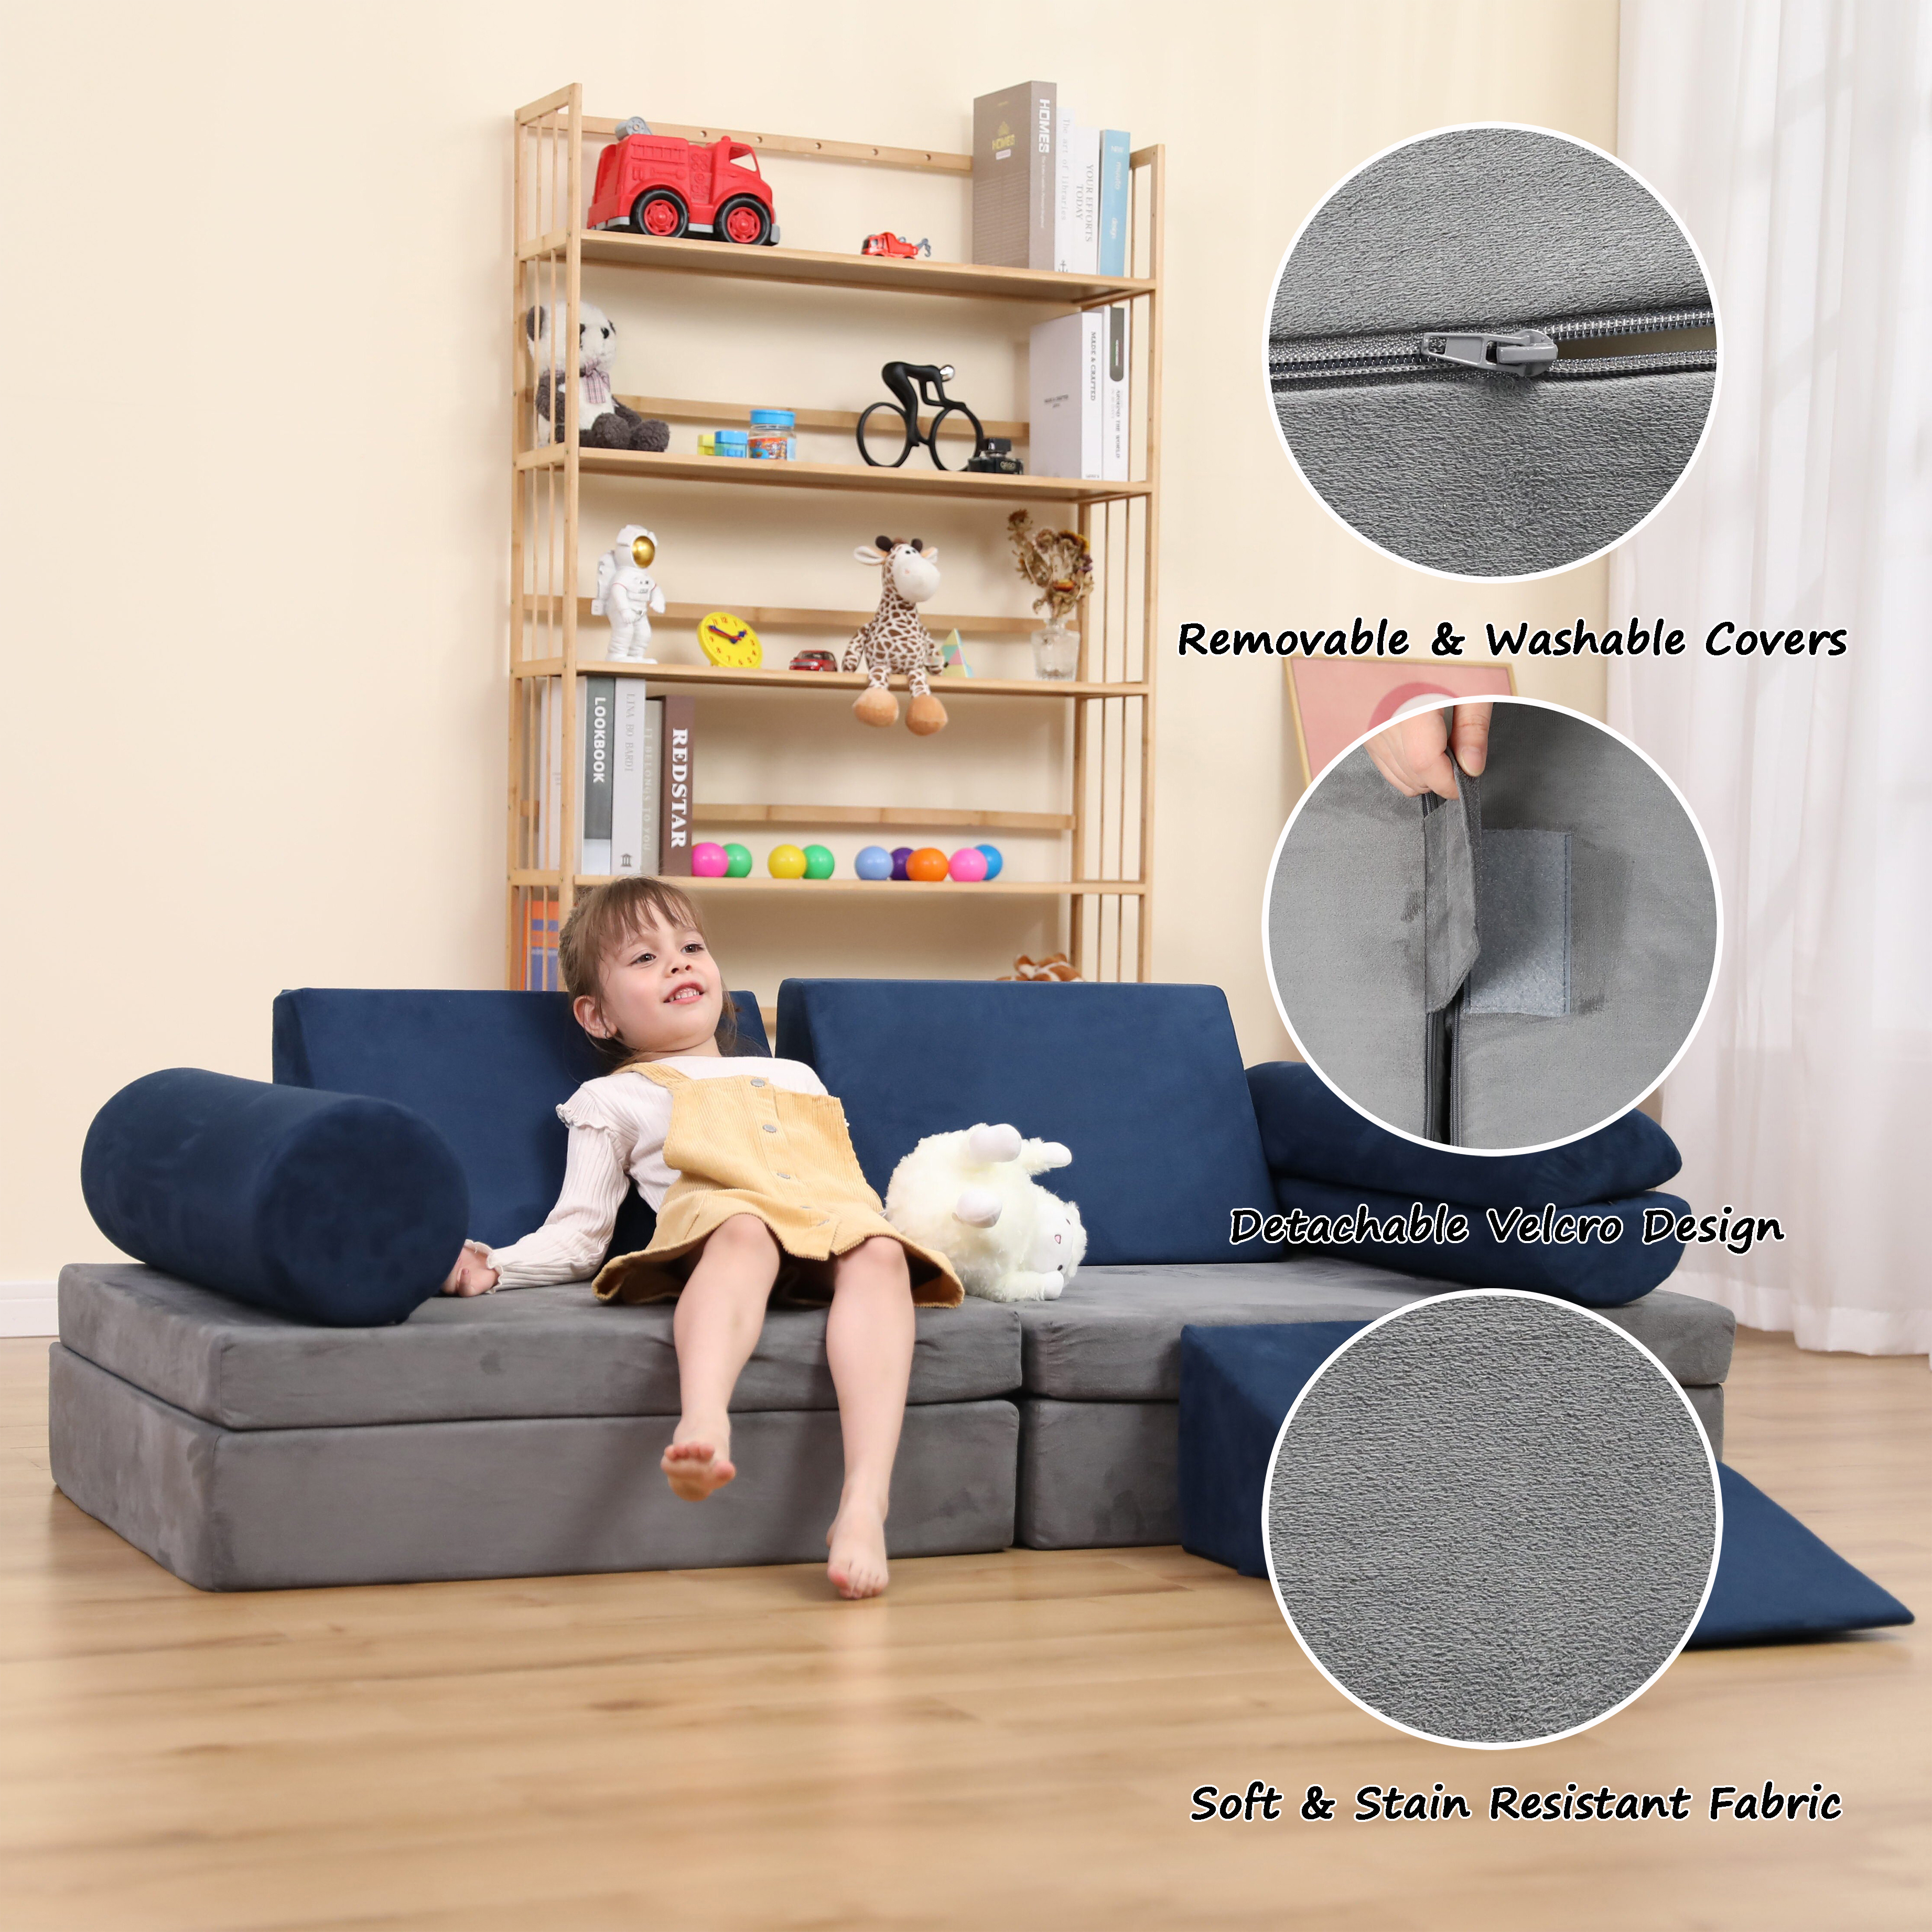 LOAOL 3-in-1 Multi-Functional Play Couch for Playroom, Kids Play Sofa Kids  Loveseat, Step and Slide Climber Crawl (Grey & Blue) 